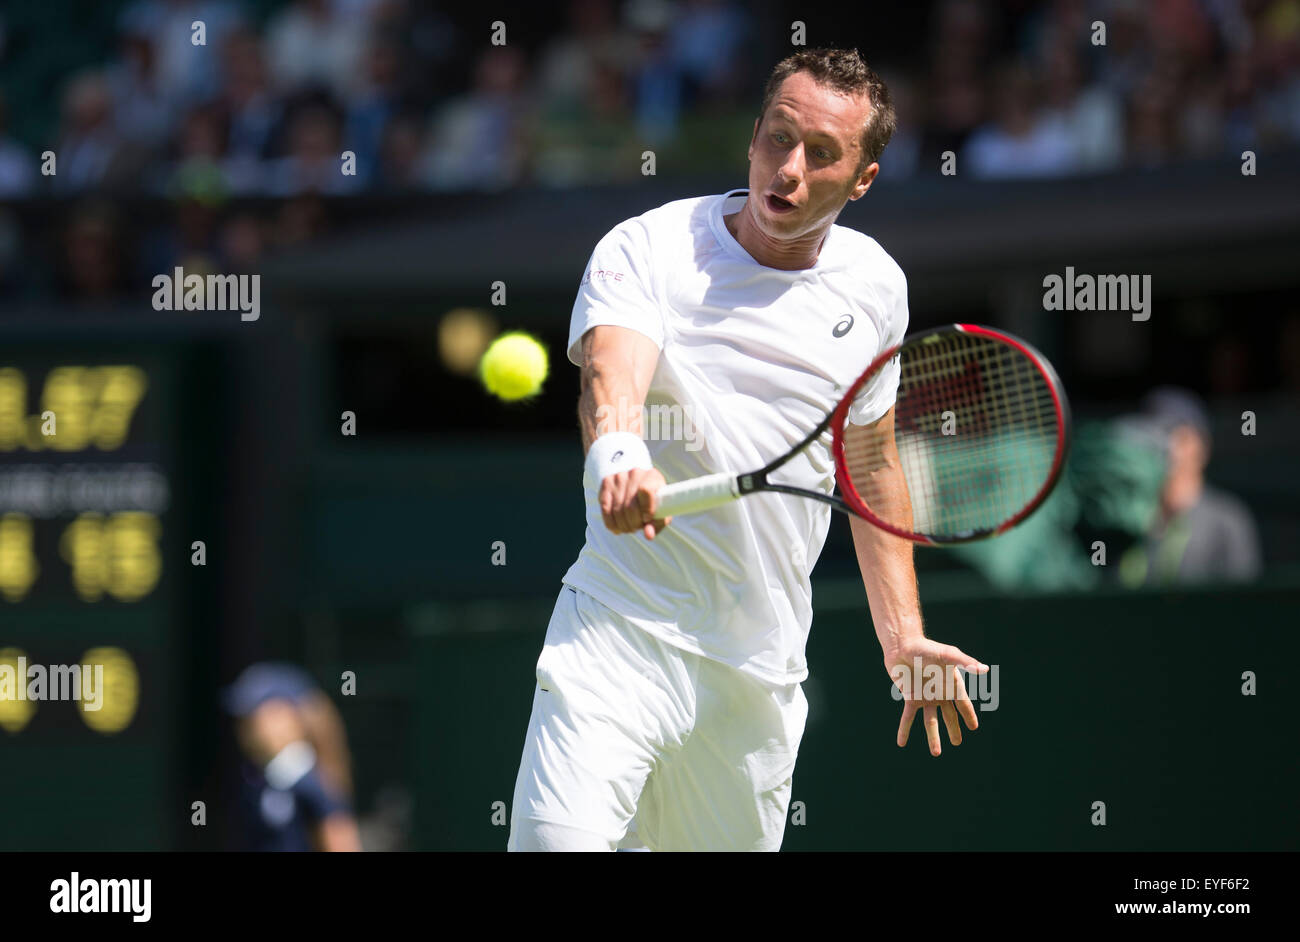 29.06.2015. die Wimbledon Tennis Championships 2015 statt in The All England Lawn Tennis and Croquet Club, London, England, UK. Stockfoto